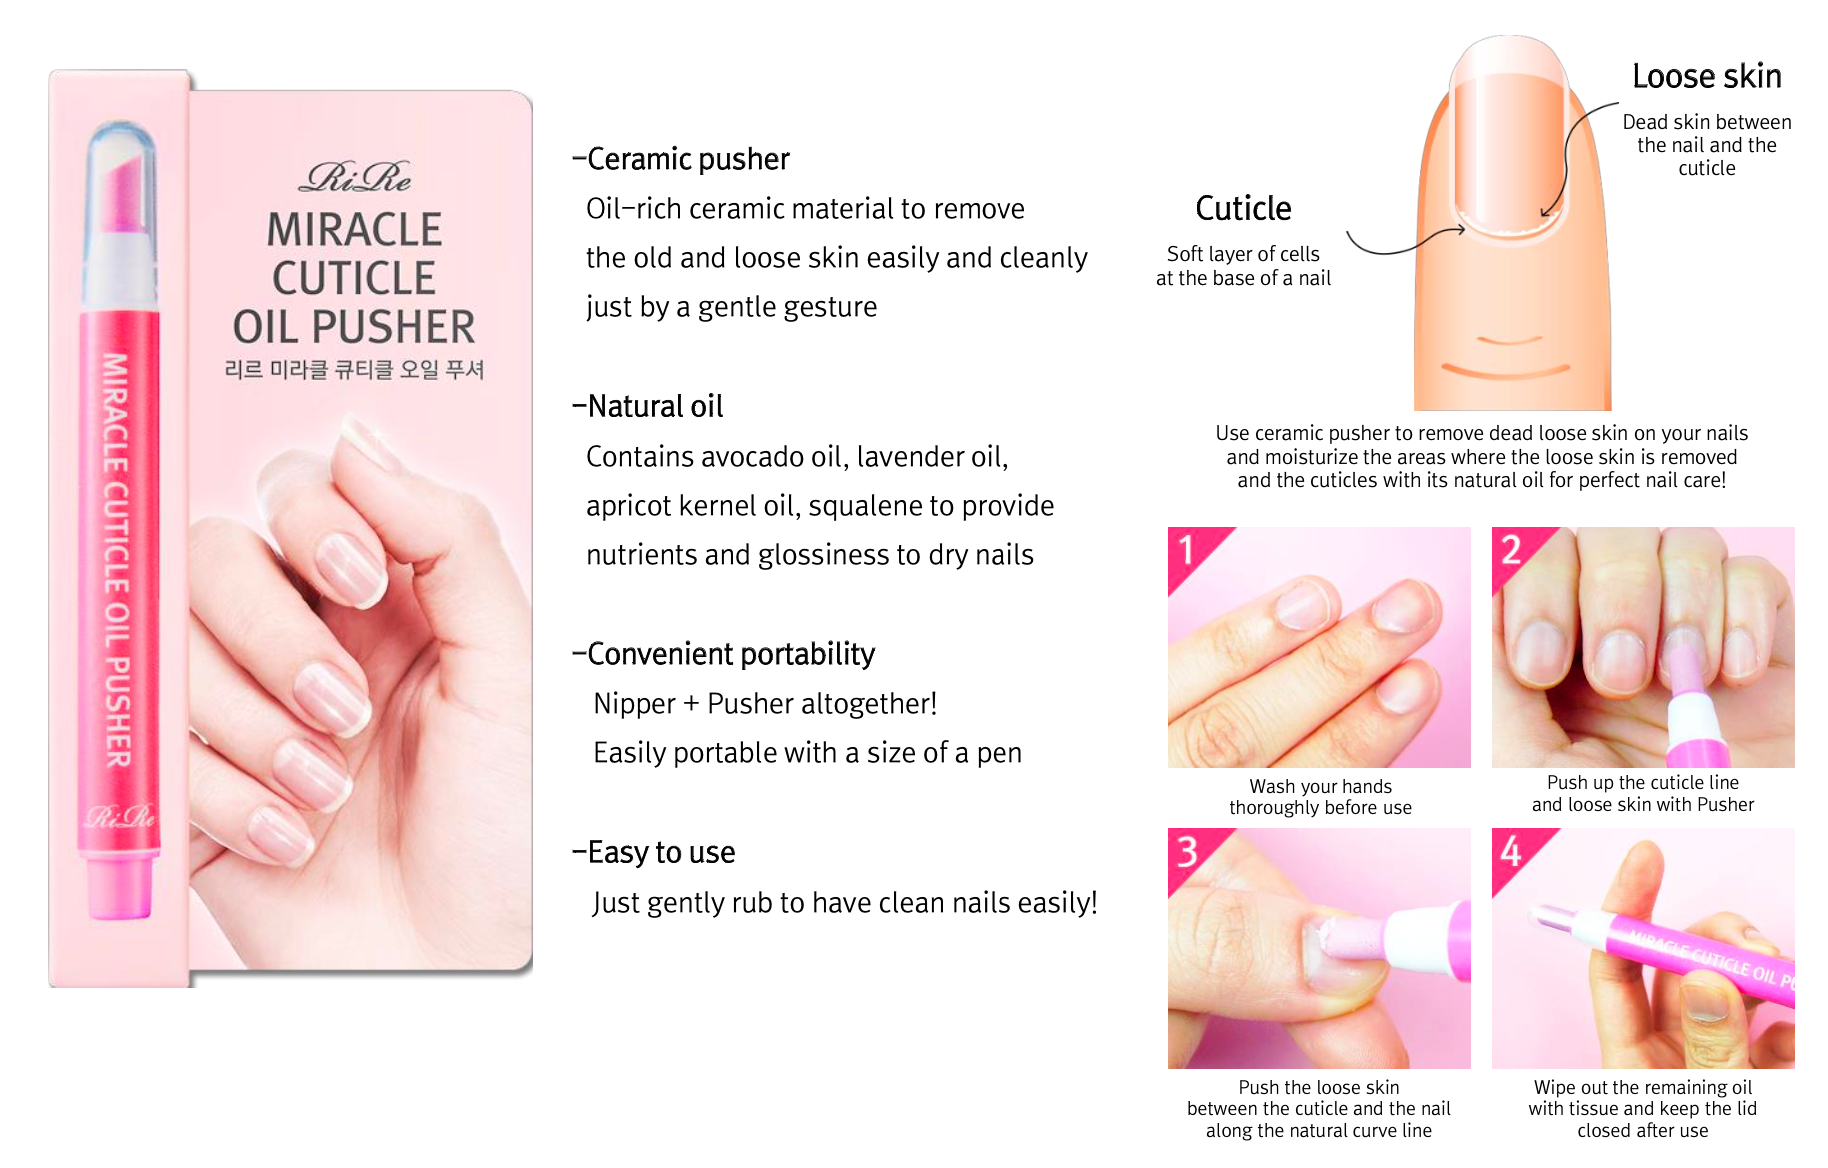 RiRe Miracle Cuticle Oil Pusher